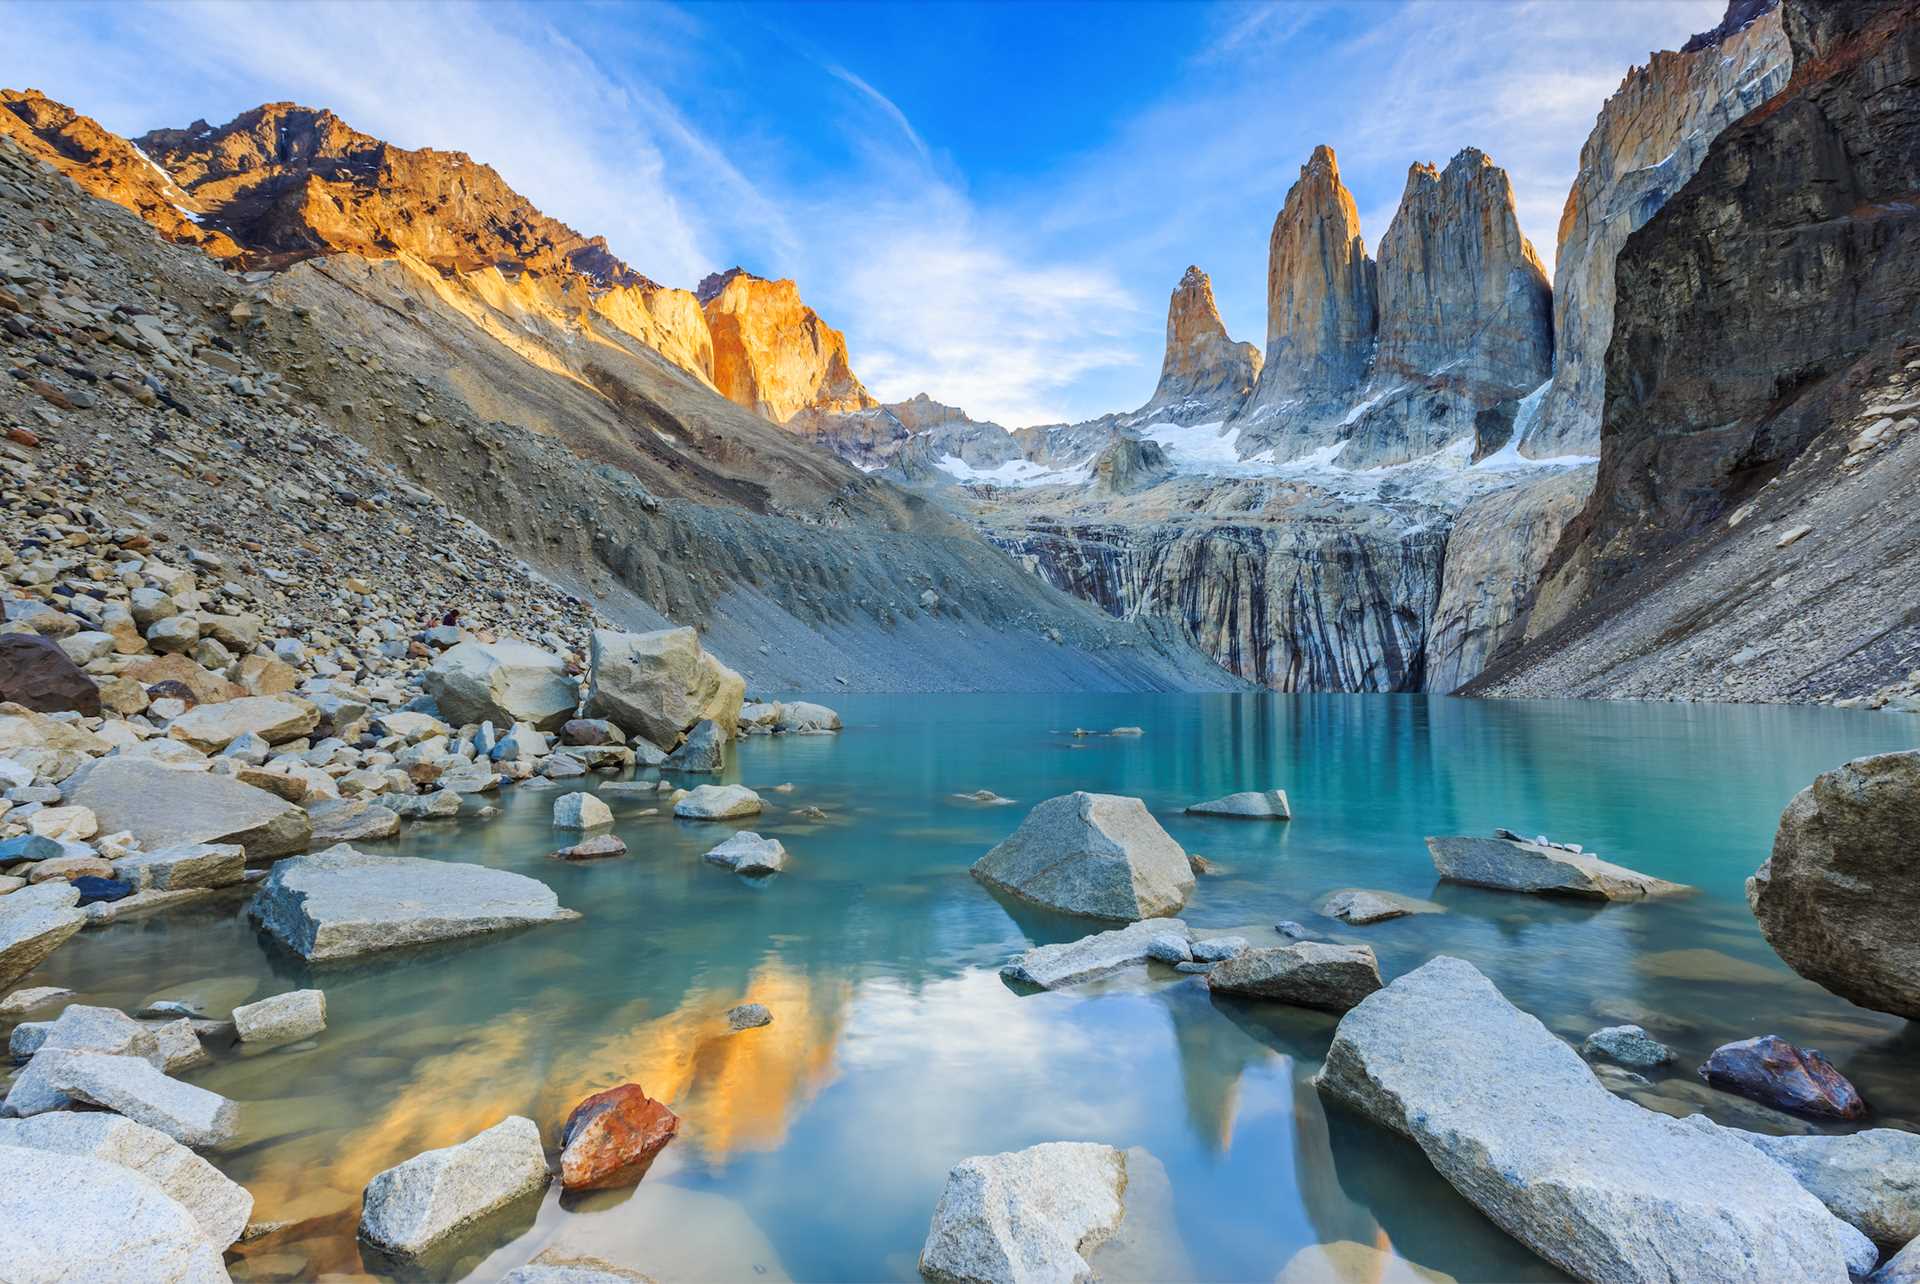 Get to Know Torres del Paine Patagonia’s Crown Jewel